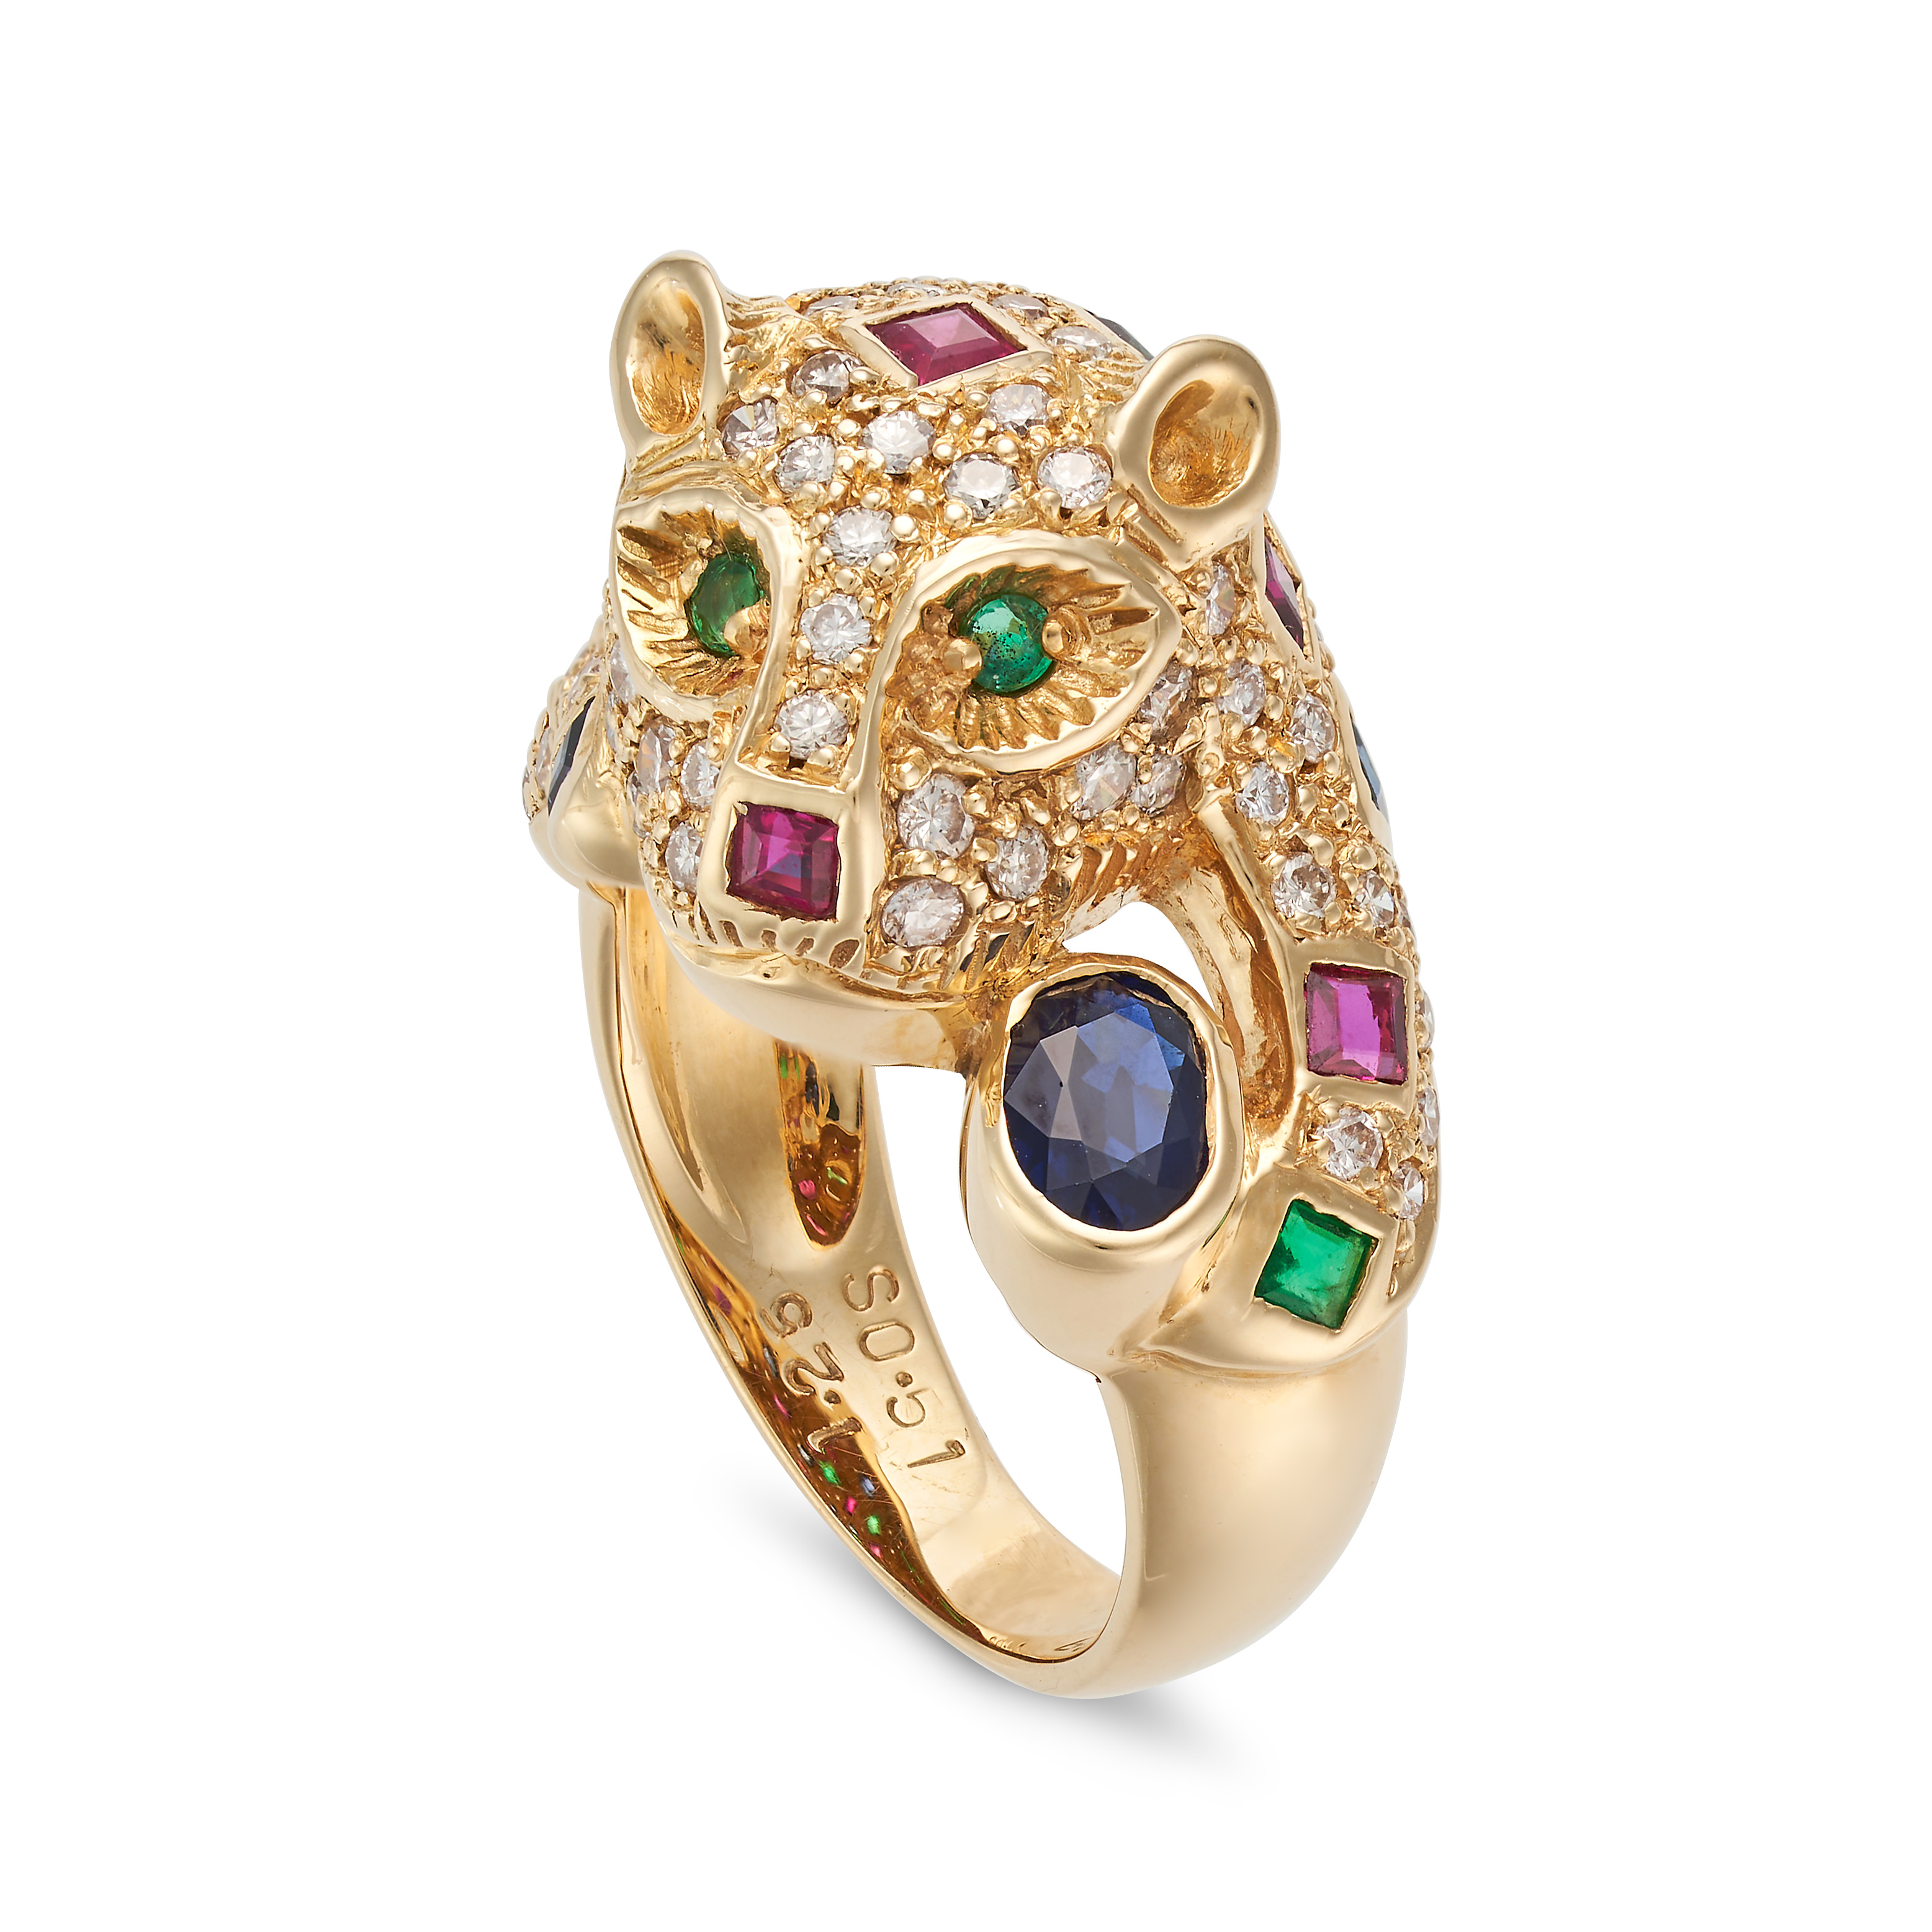 A MULTIGEM PANTHER RING designed as a coiled panther, set with square step cut rubies, emeralds a...